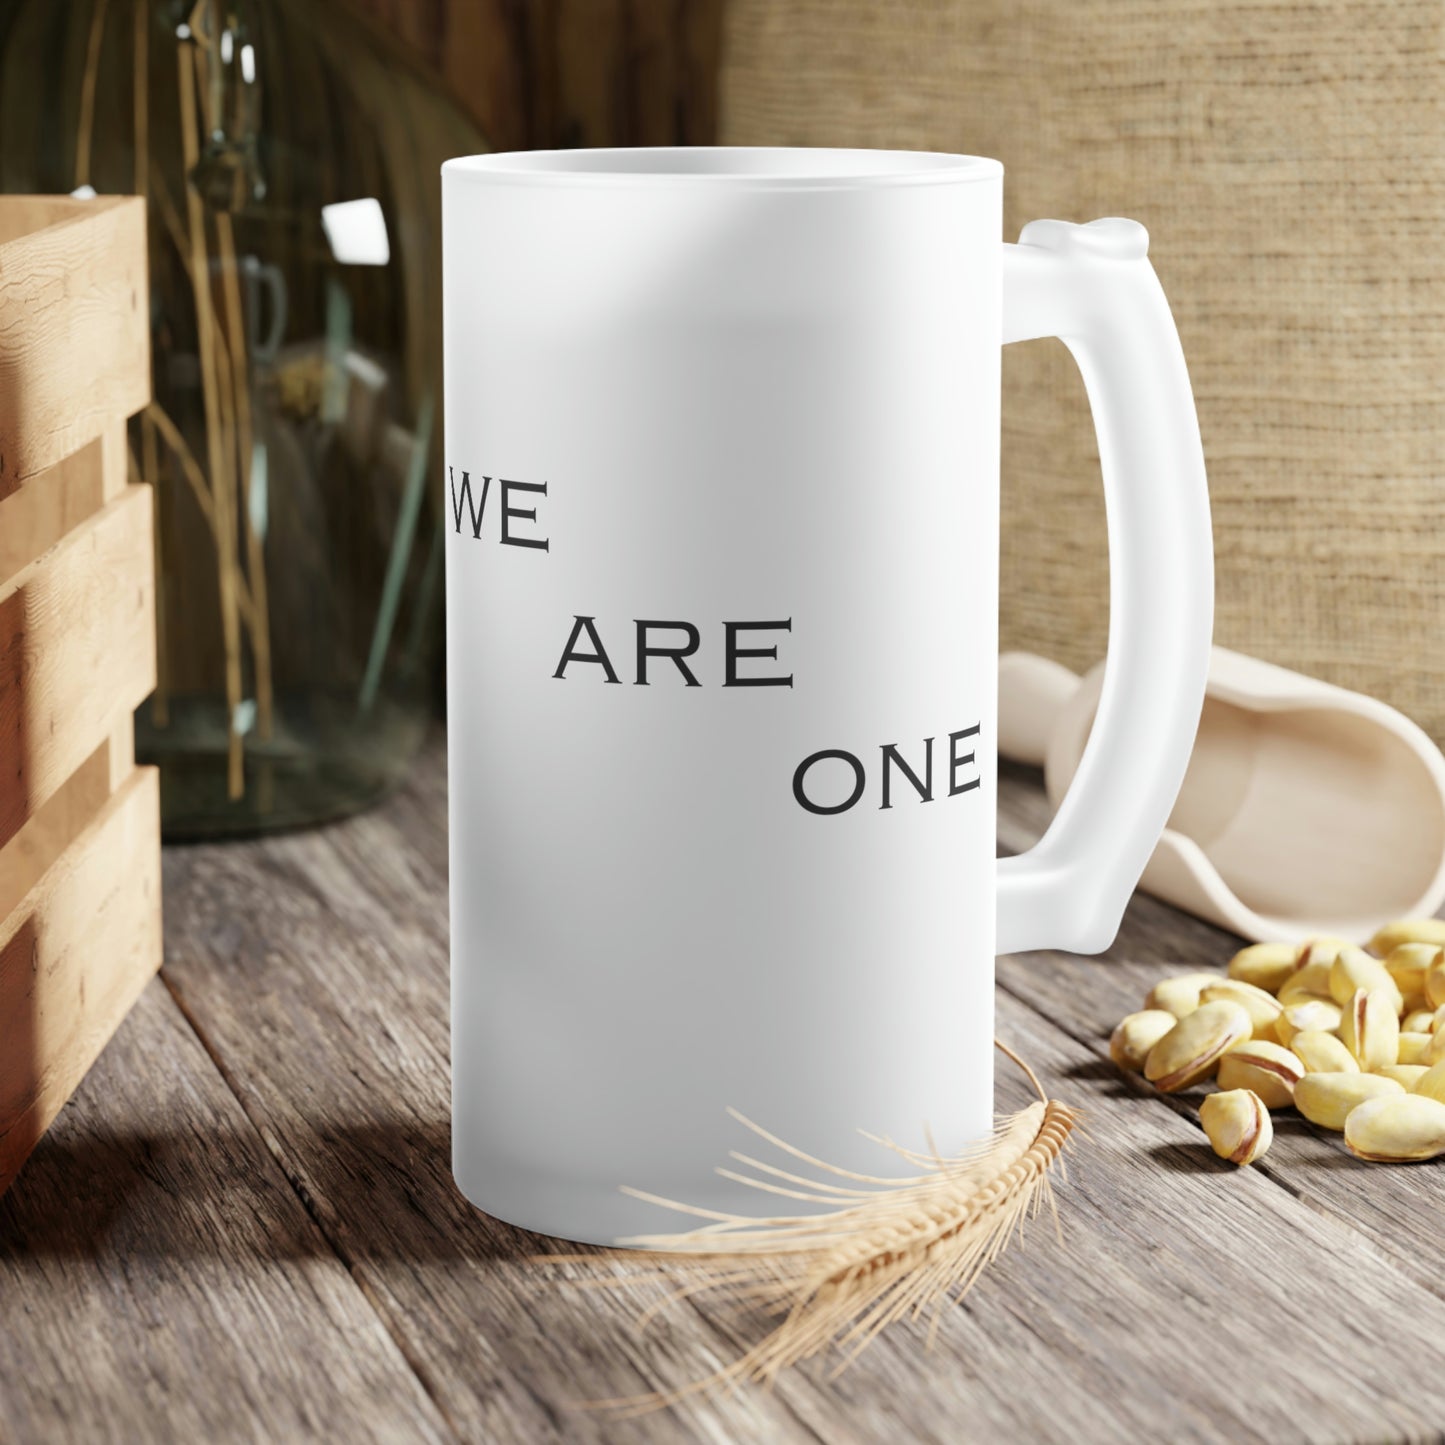 WE THE PEOPLE Frosted Glass Beer Mug